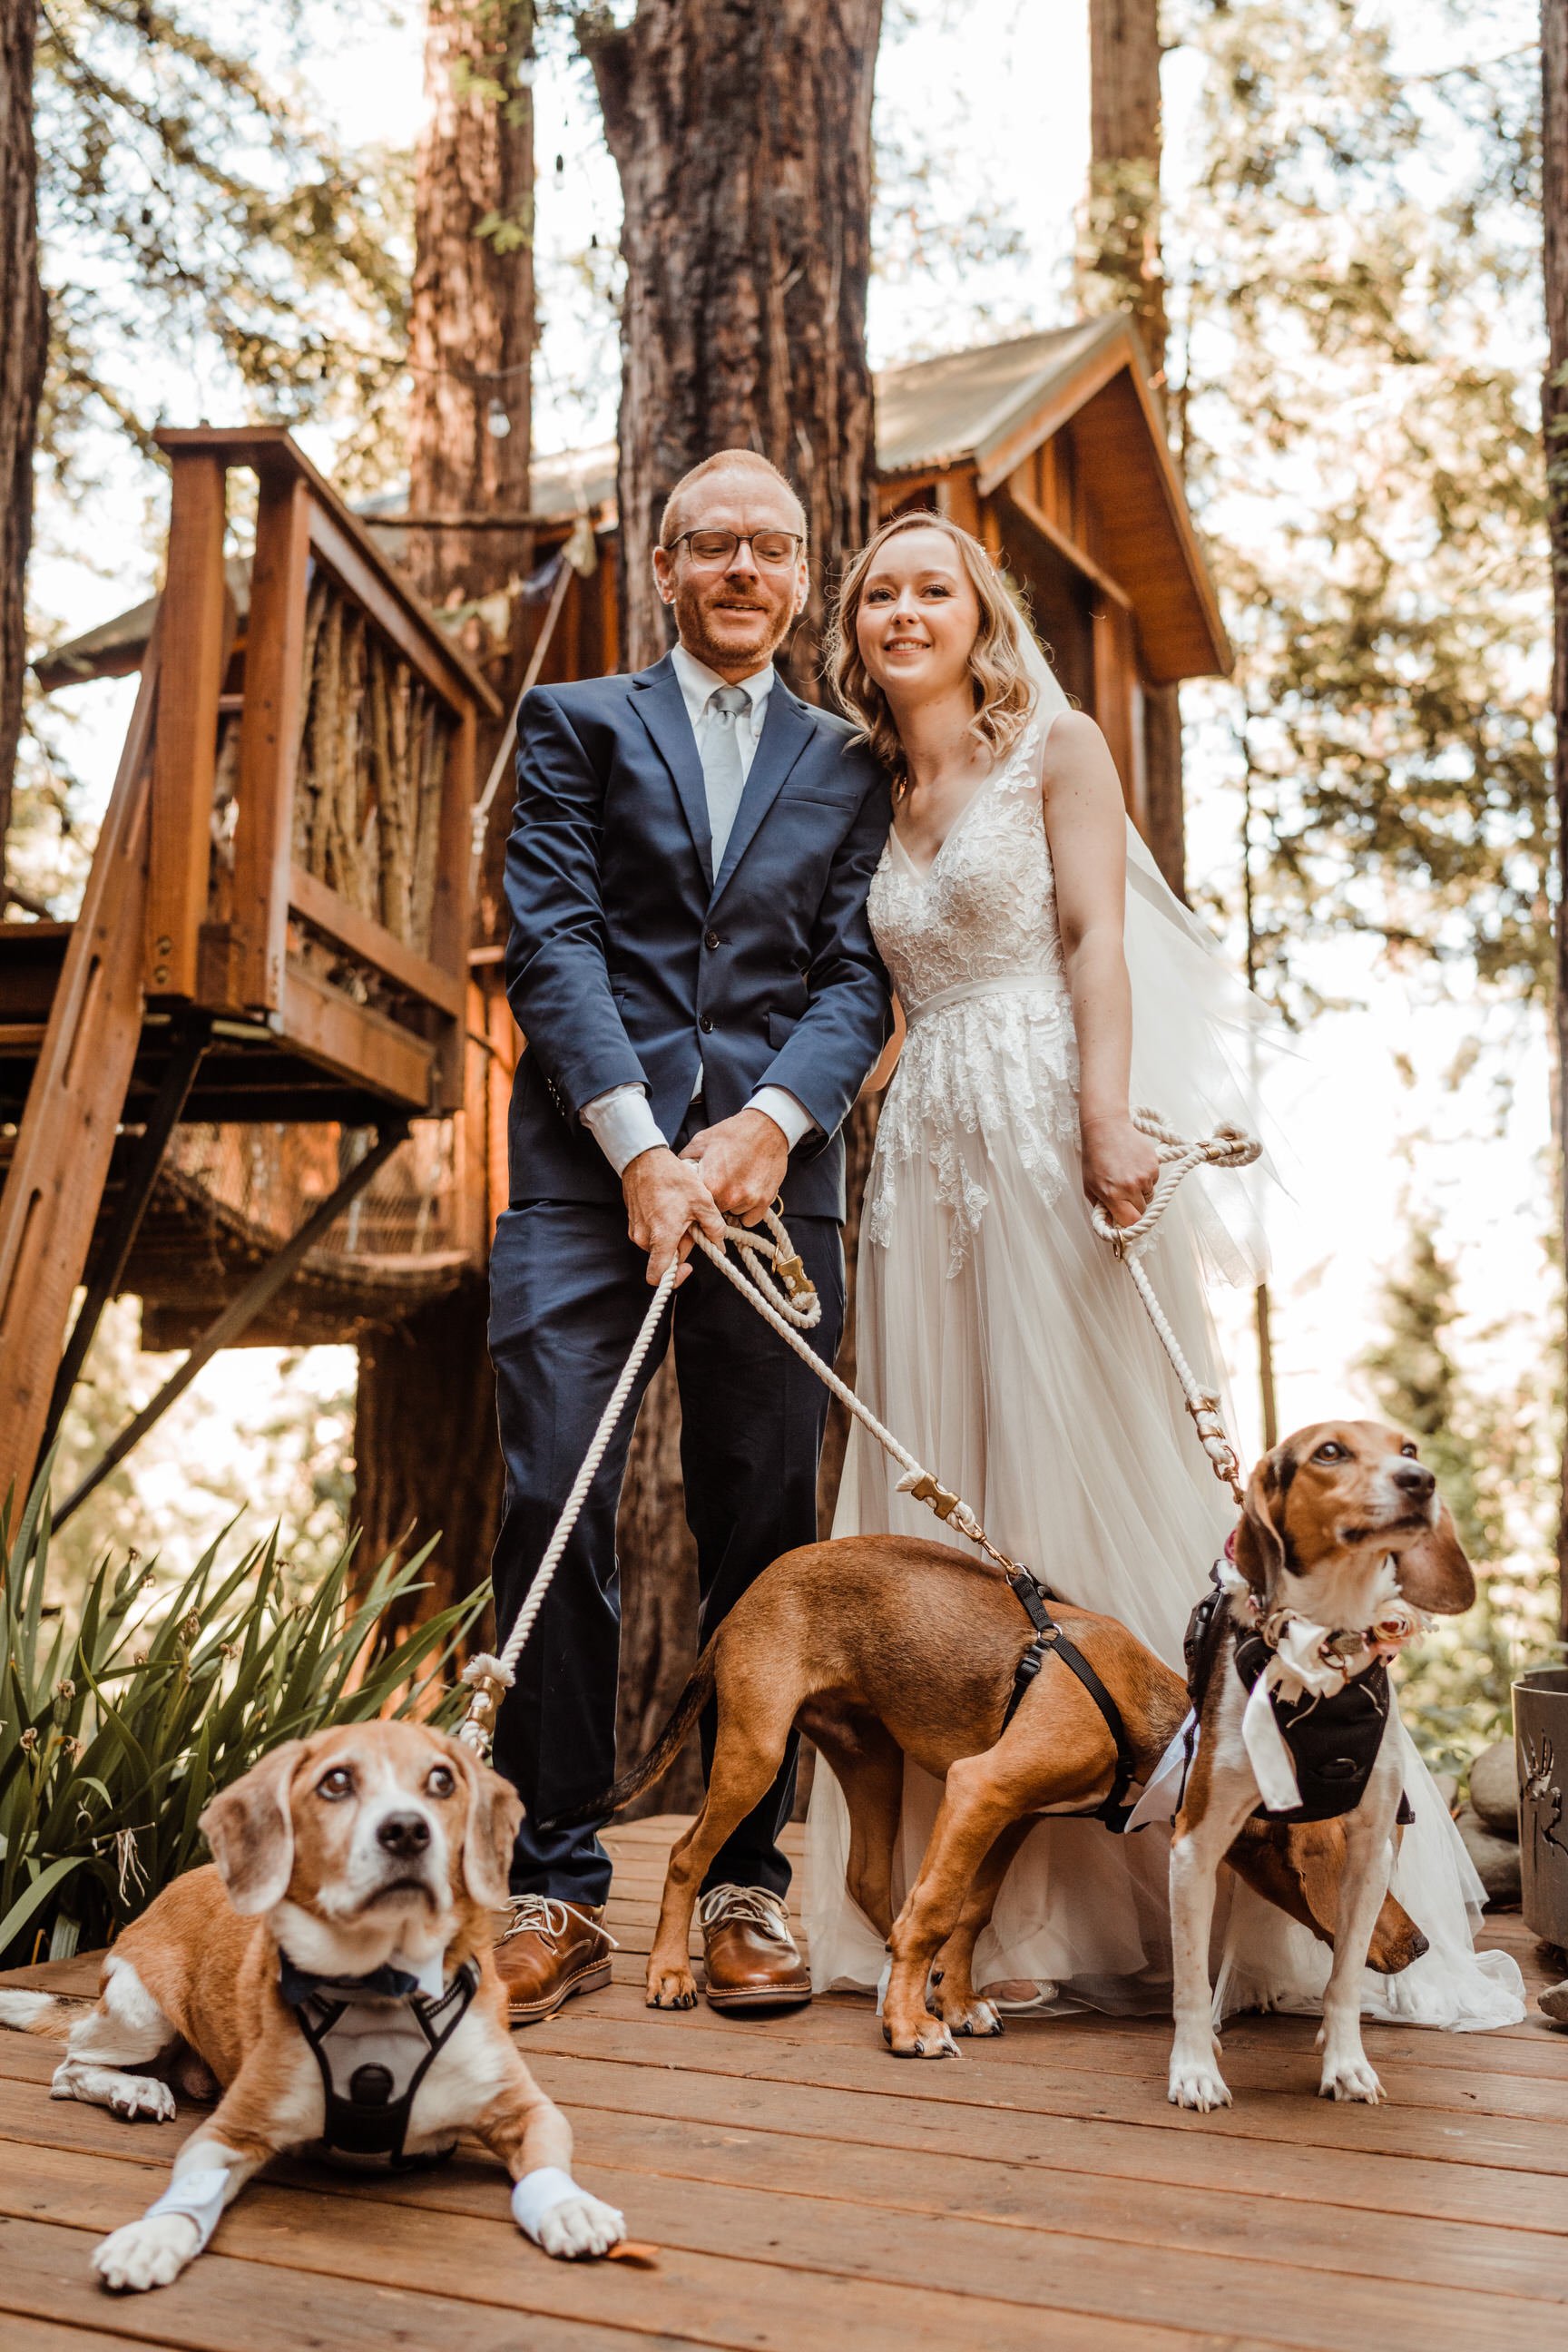 Wedding-in-the-Woods-Eloping-bride-and-groom-with-three-rescue-dogs-in-wedding-attire (2).jpg